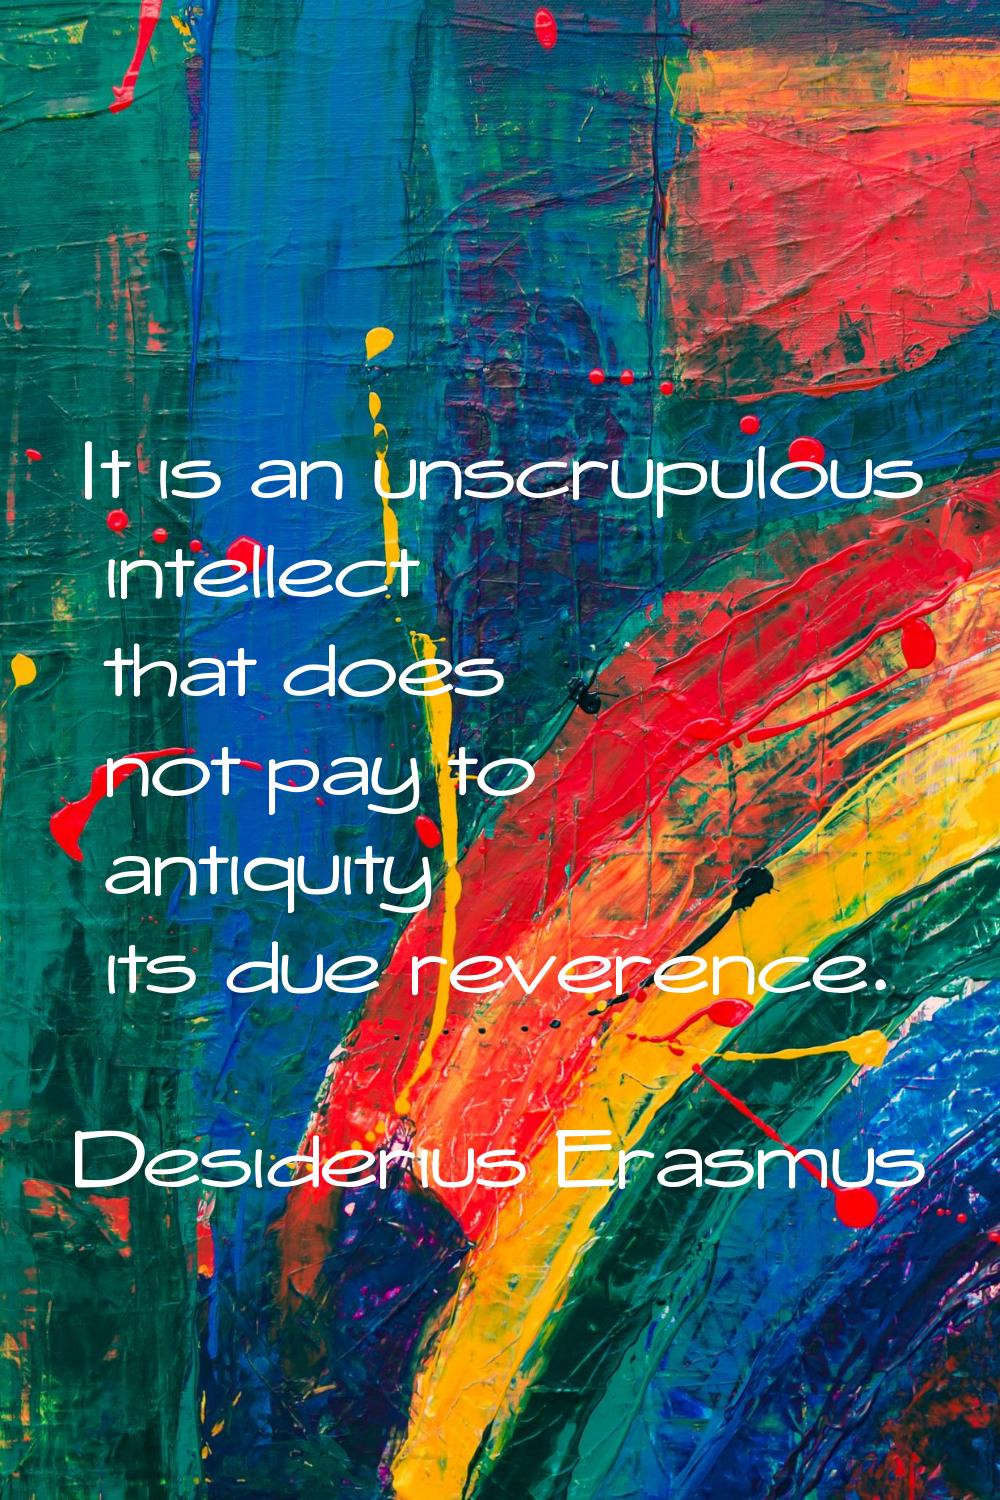 It is an unscrupulous intellect that does not pay to antiquity its due reverence.